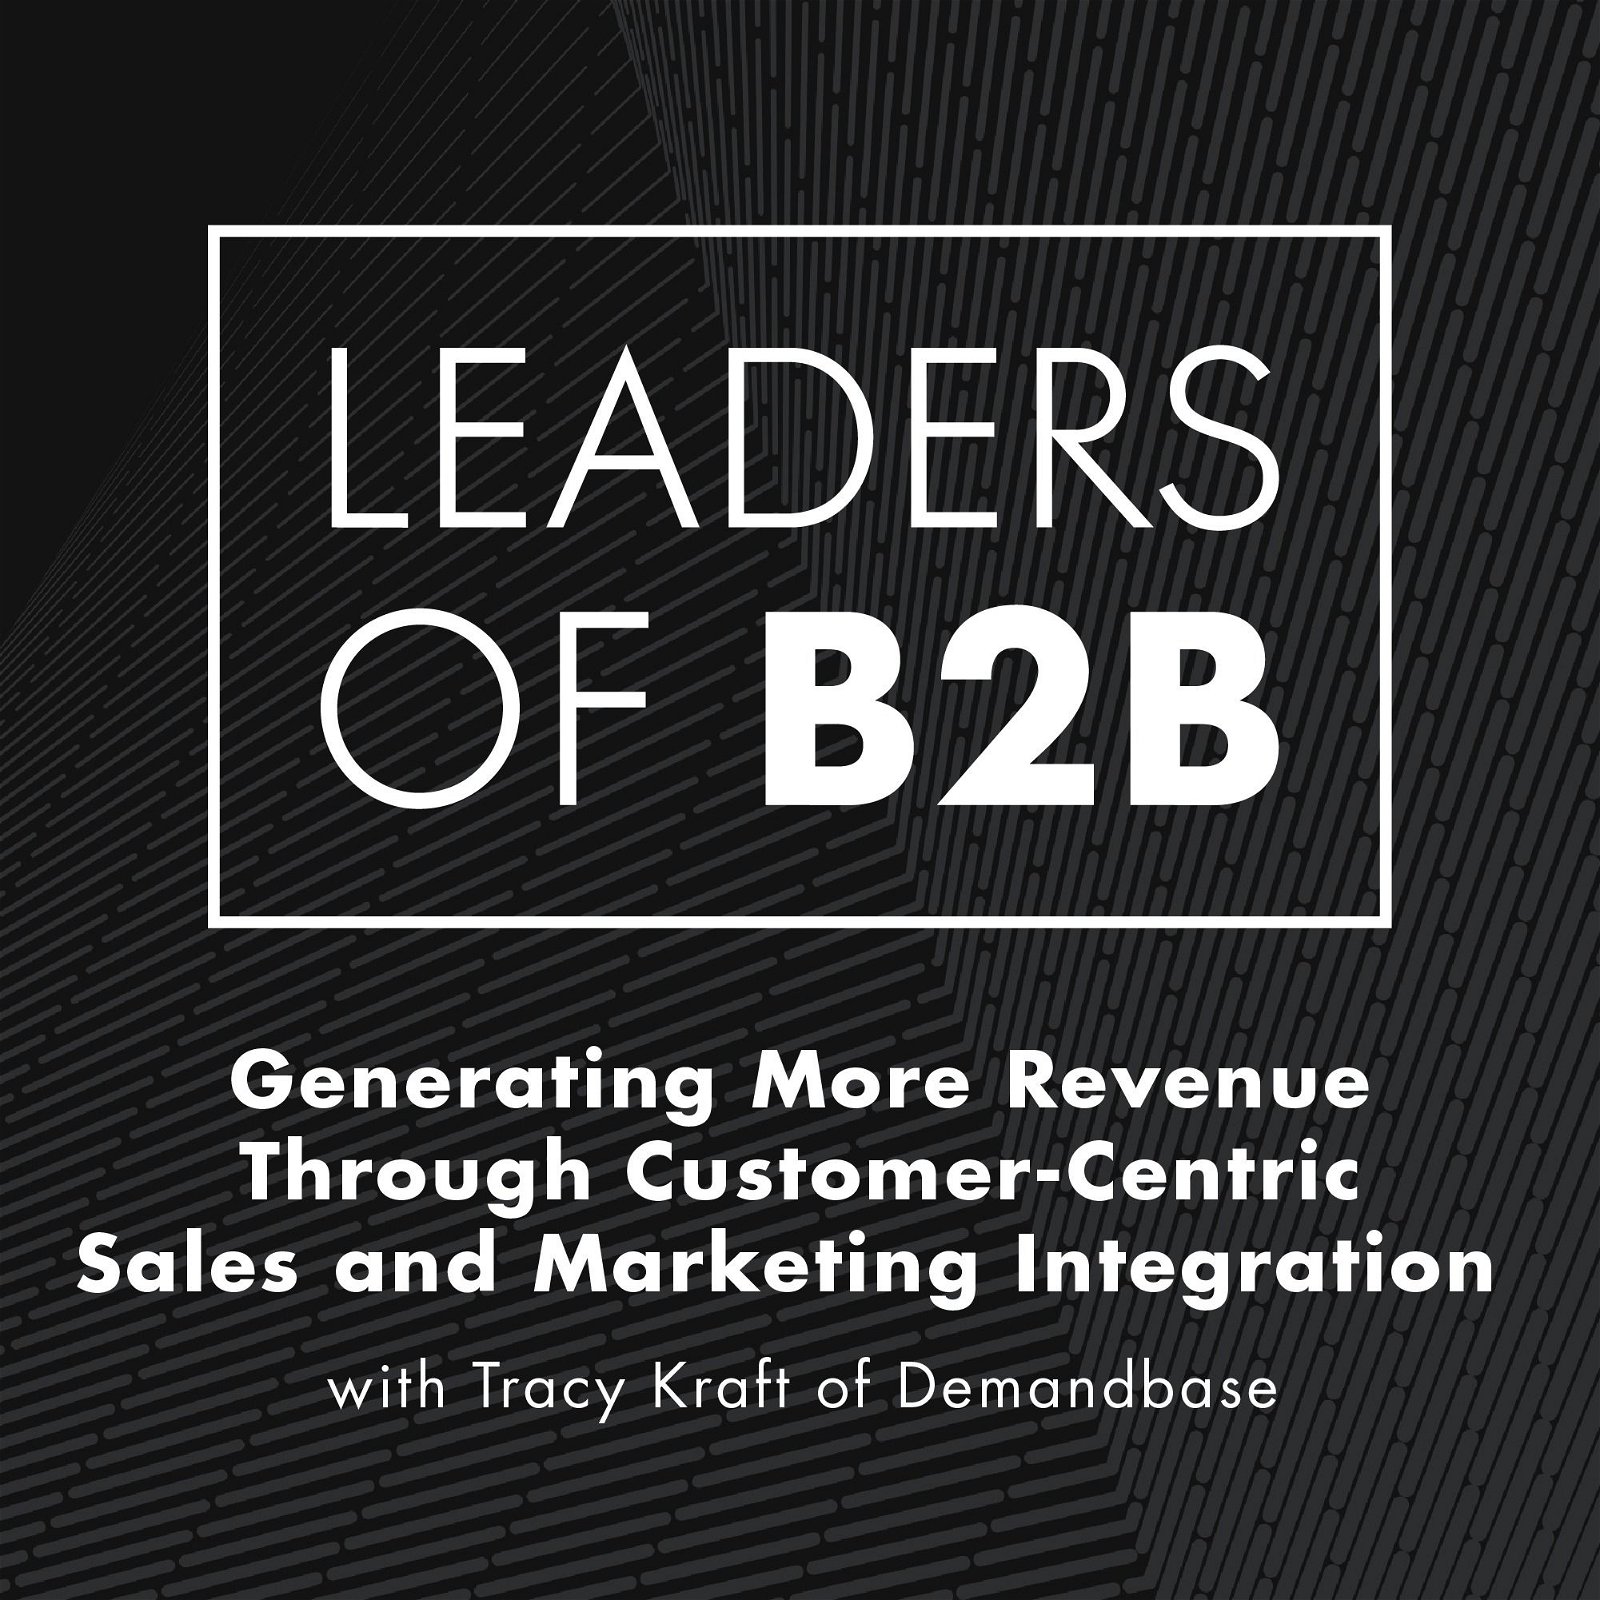 Generating More Revenue Through Customer-Centric Sales and Marketing Integration with Tracy Kraft of Demandbase